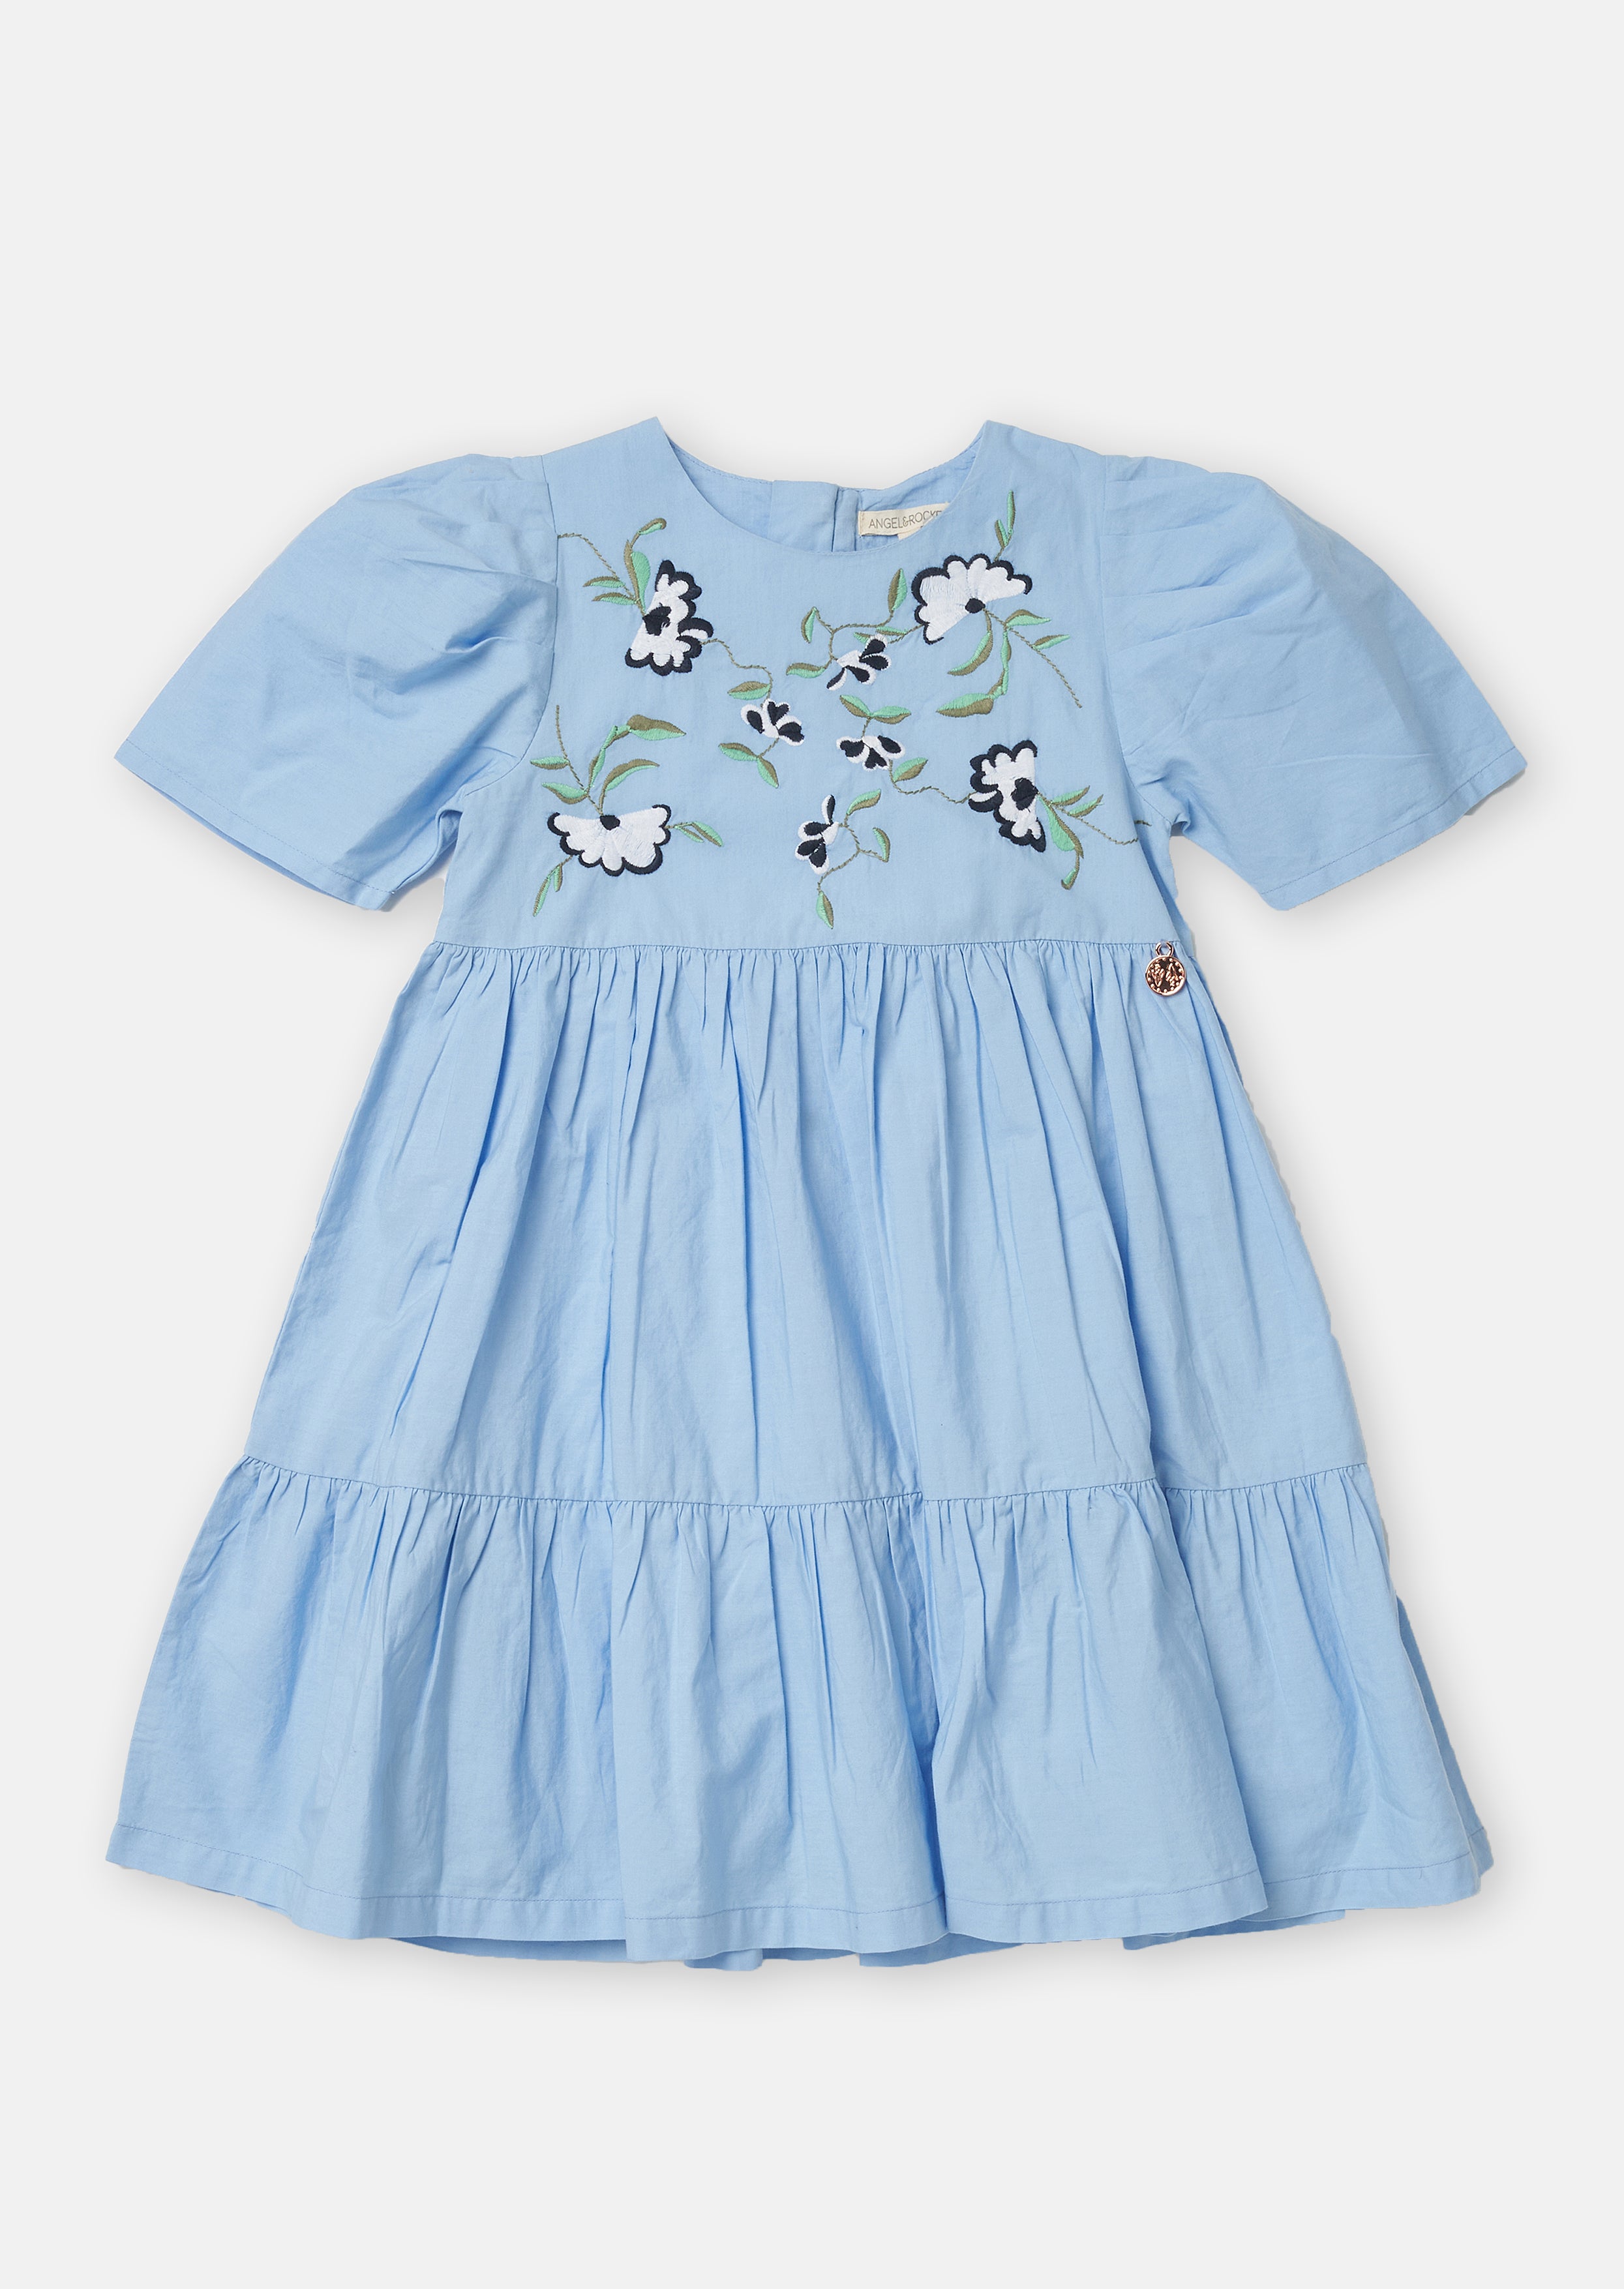 Girls Floral Embroidered Cotton Blue Dress with Puff Sleeves